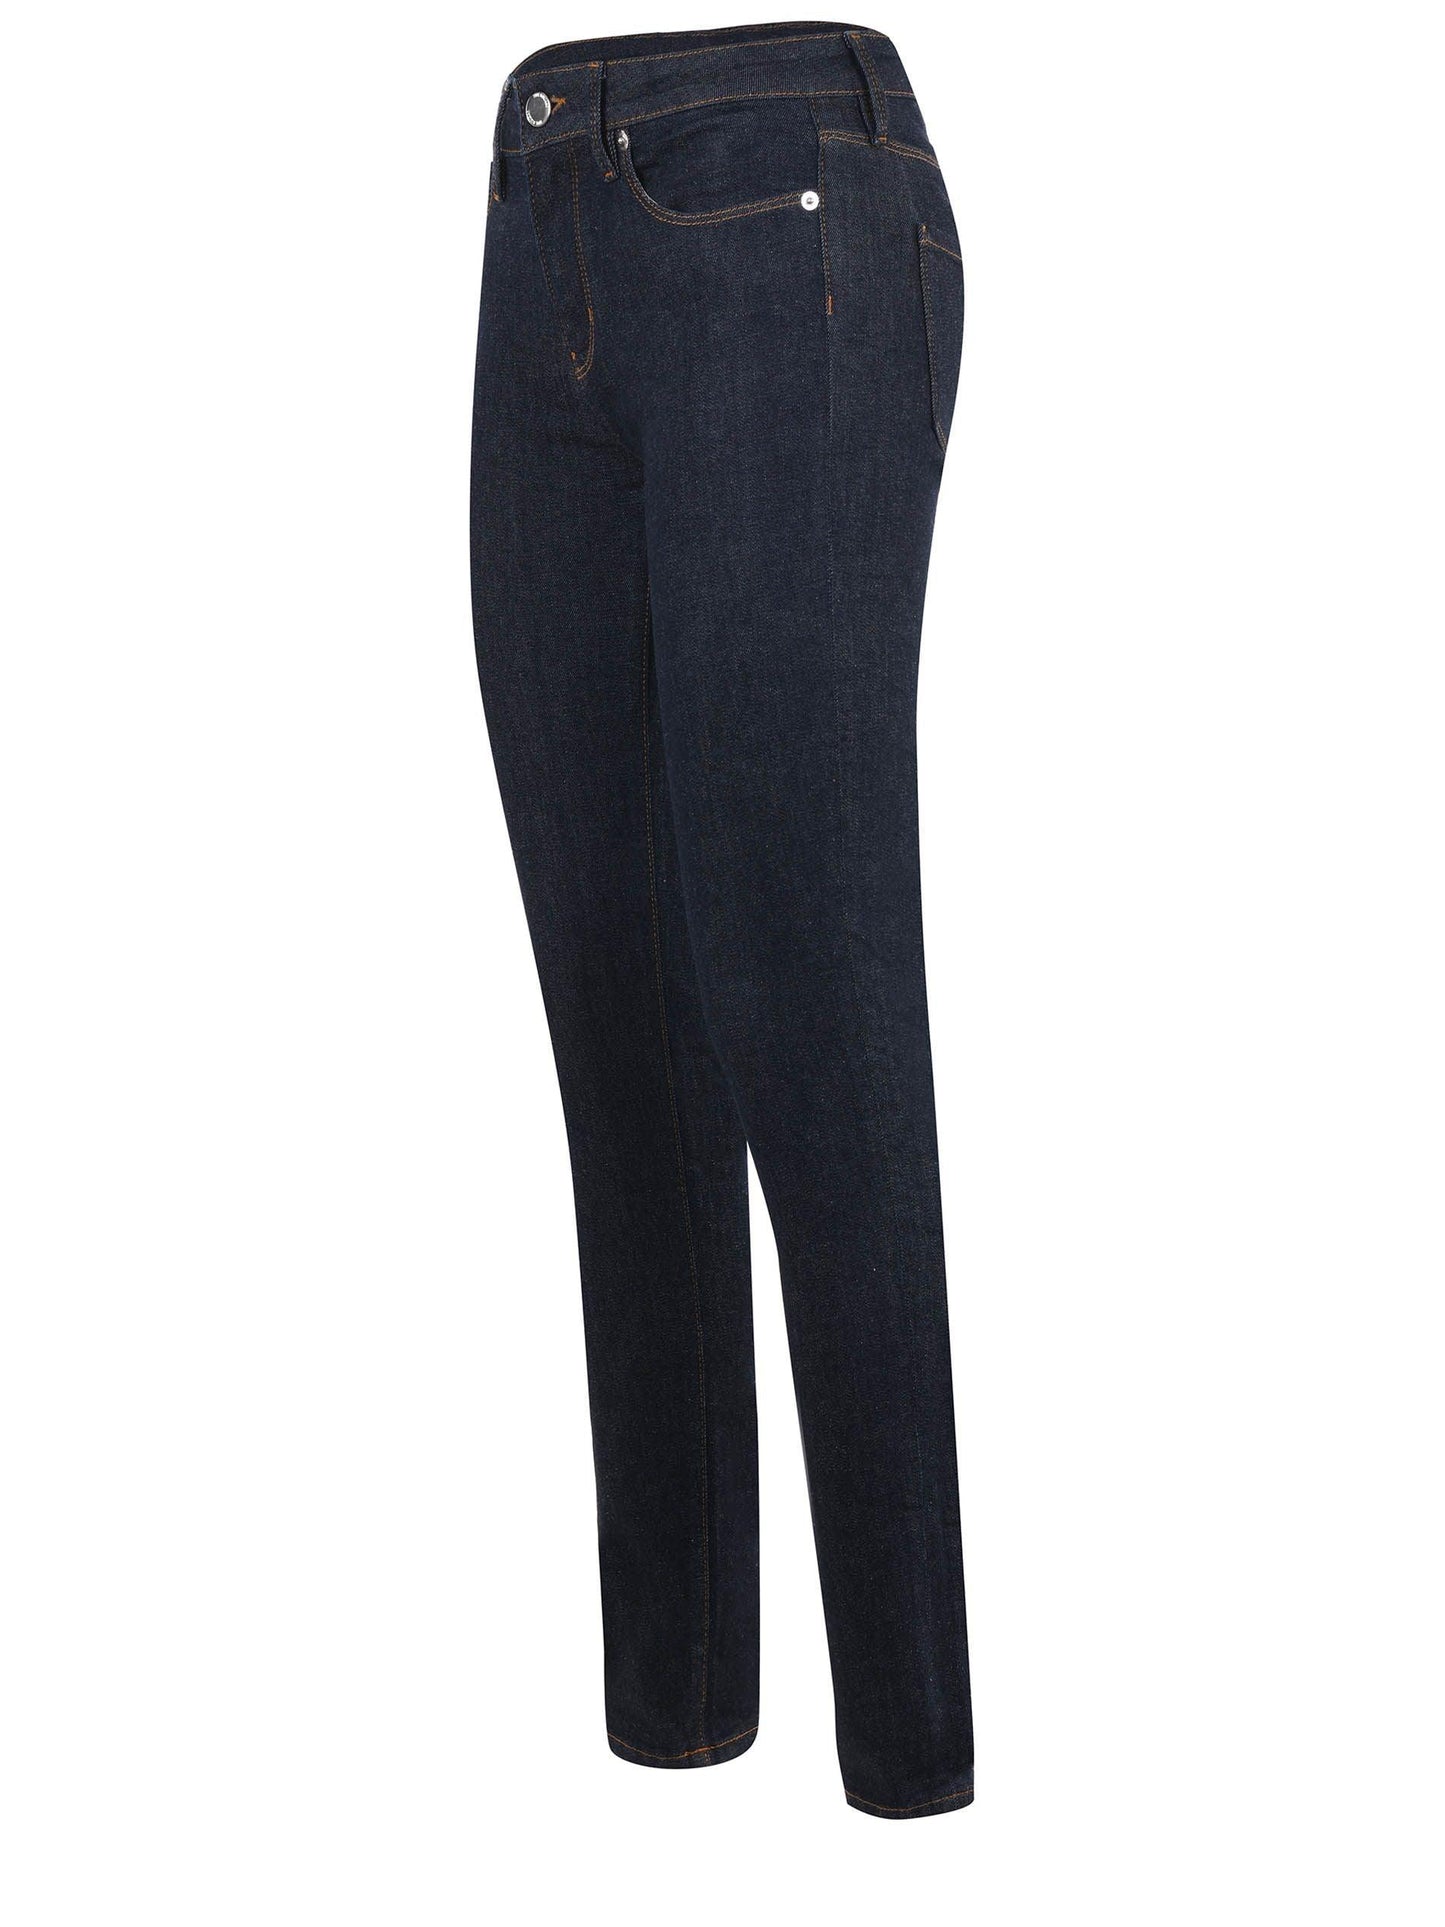 Love Moschino Women's Dark Blue Stretch Slim Fit Jeans designed by Love Moschino available from Moon Behind The Hill 's Clothing > Pants > Womens range